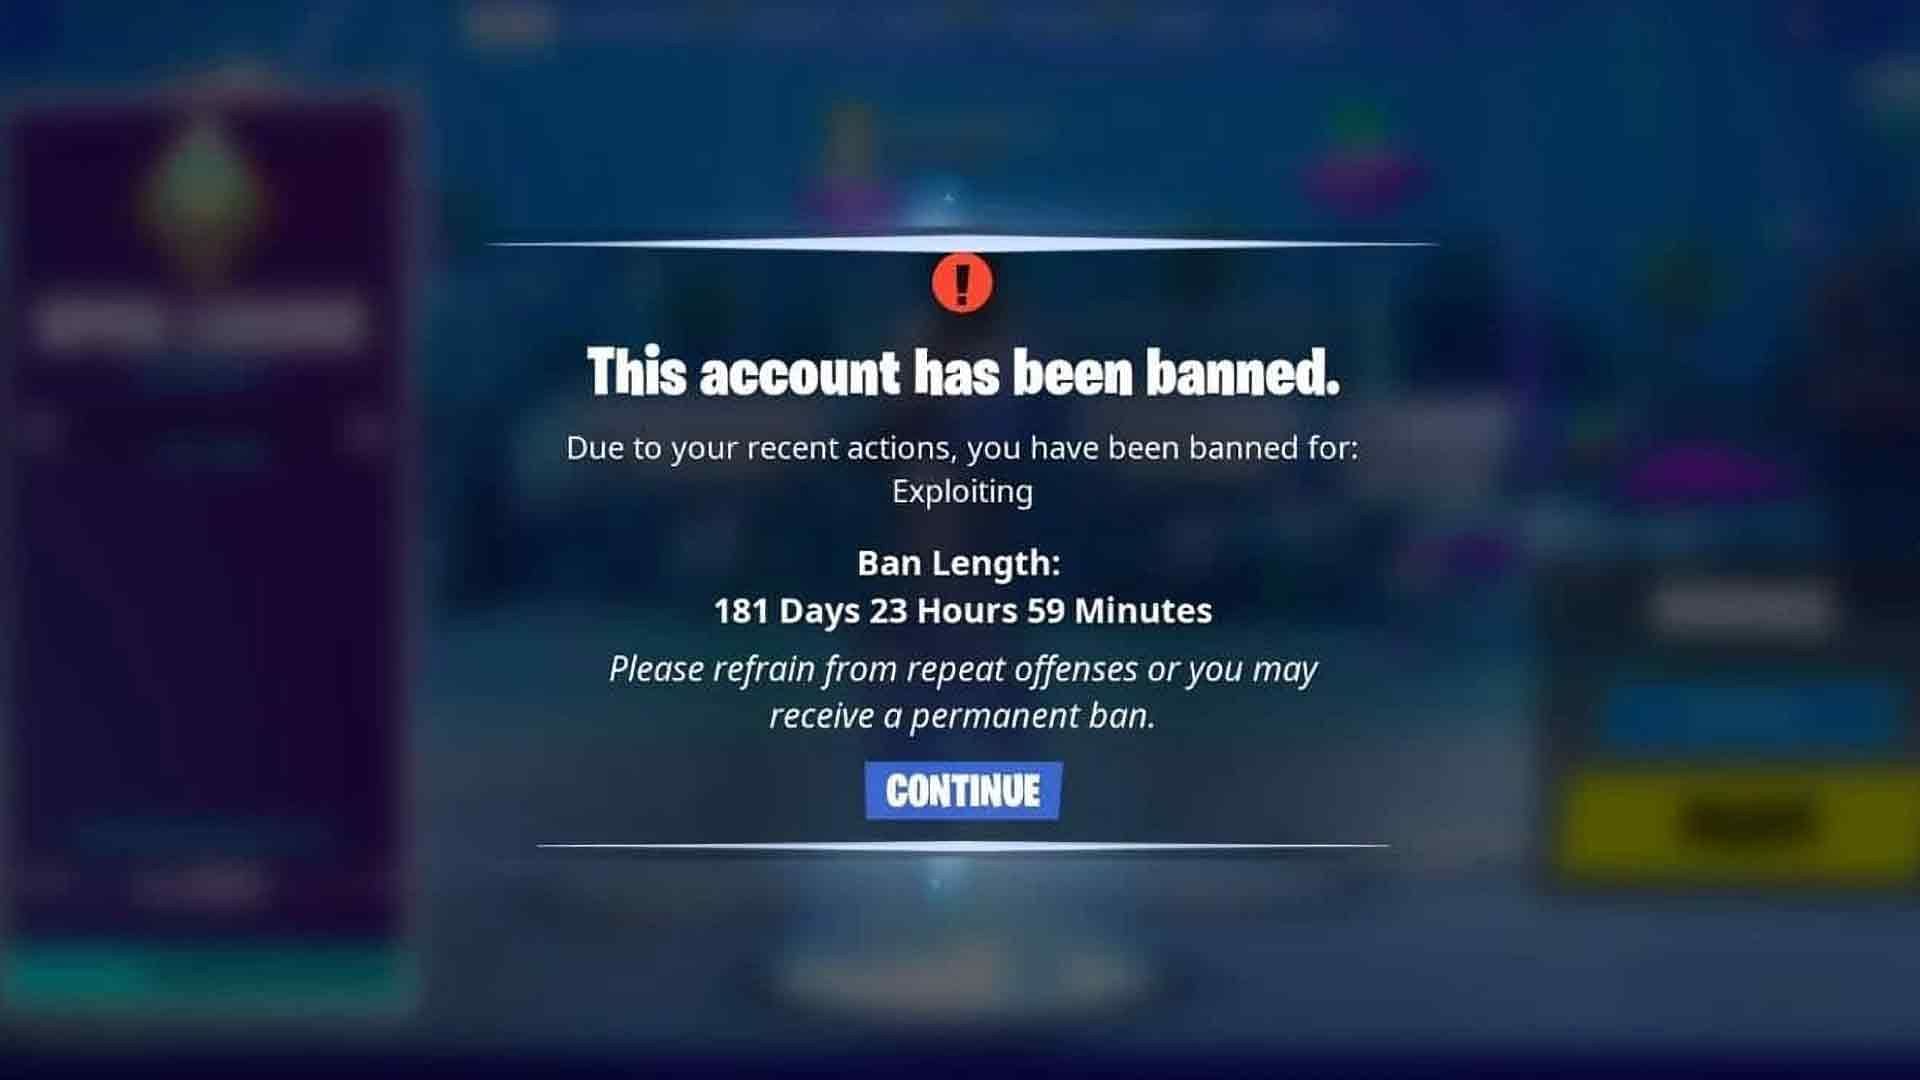 Epic Games just banned some Fortnite accounts, but no one knows